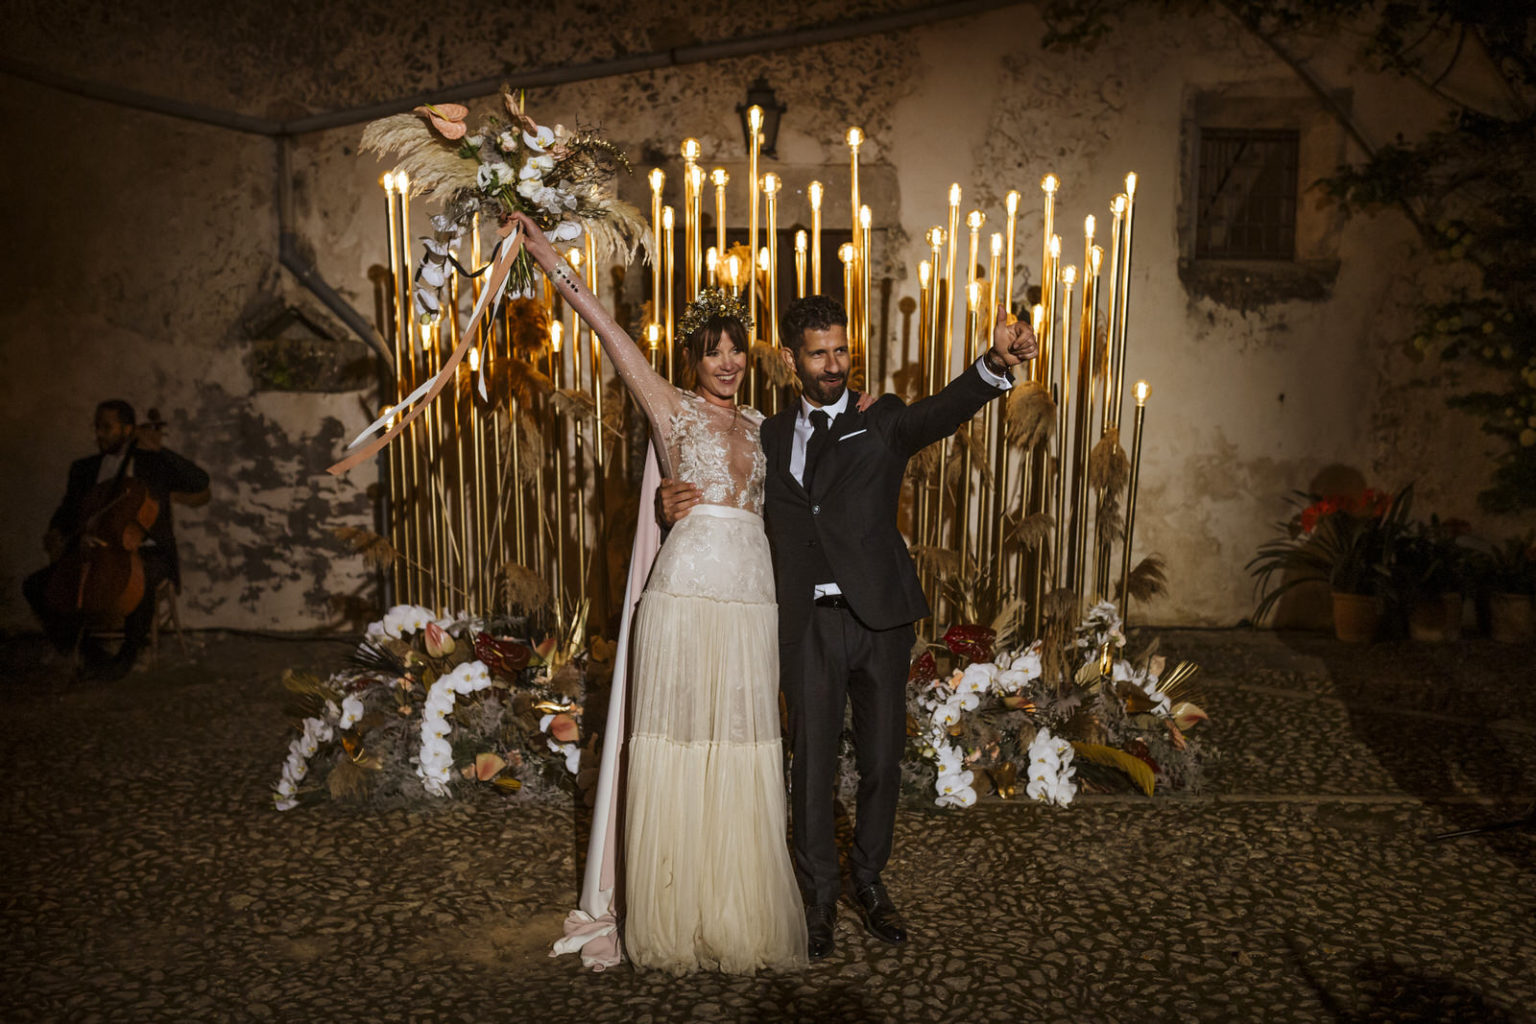 This Mallorca wedding was modern and ultra bold, with lots of unique details and whimsy touches